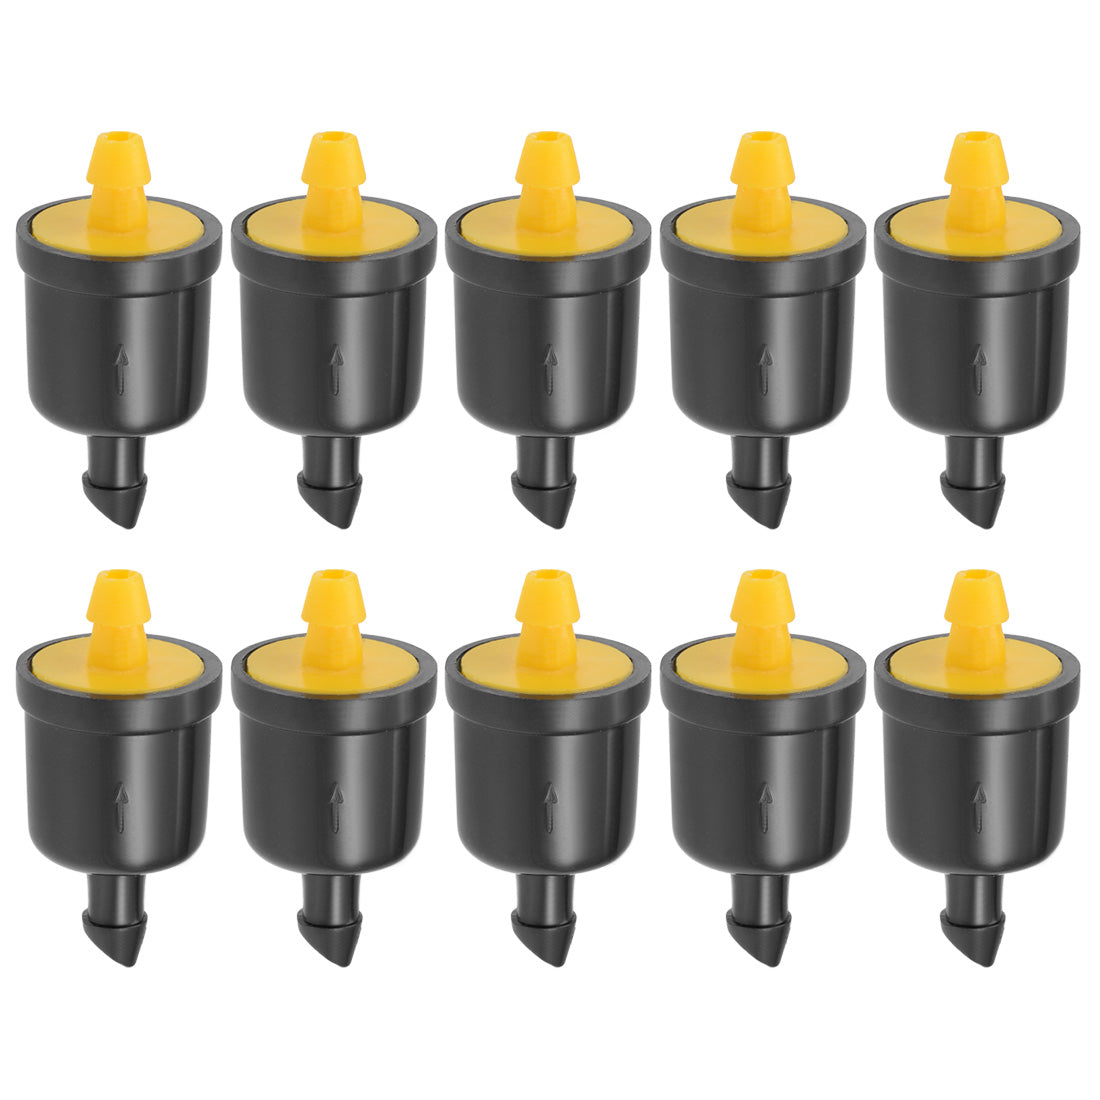 uxcell Uxcell Stabilizer Dripper 5 GPH 20L/H Emitter for Garden Lawn Drip Irrigation with Barbed Hose Connector Plastic Yellow 20pcs